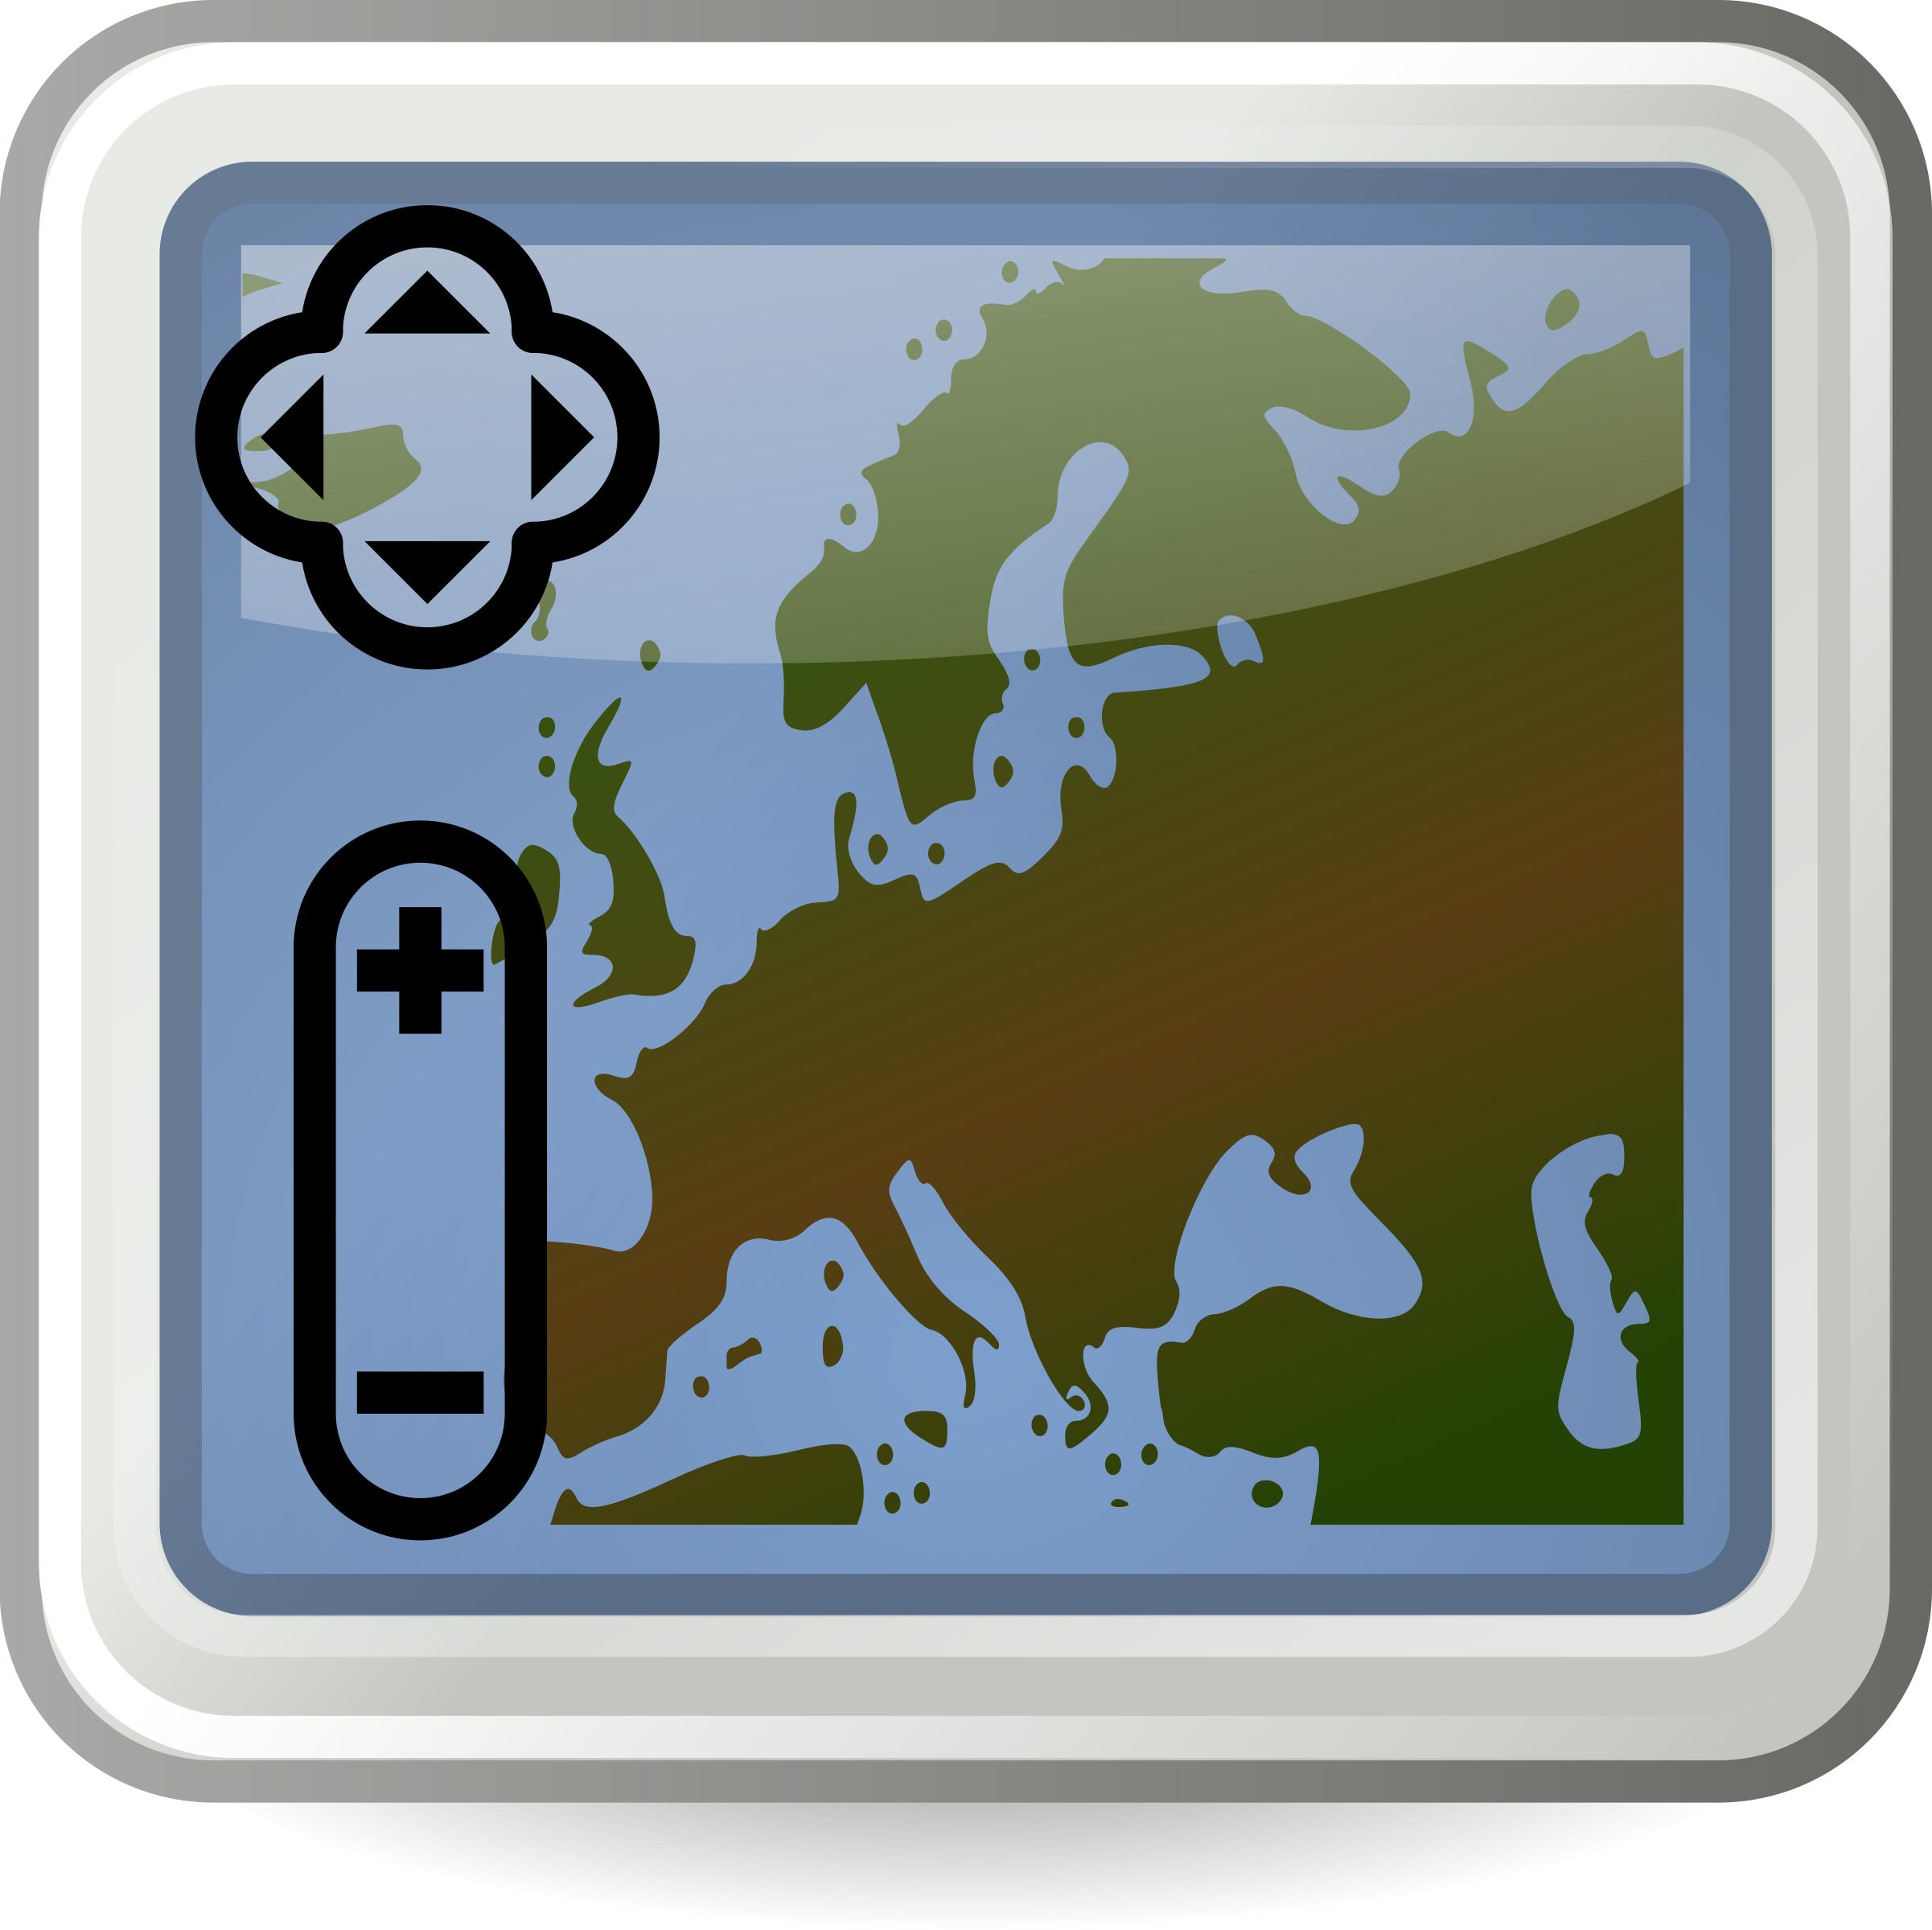 Tango style map application icon png